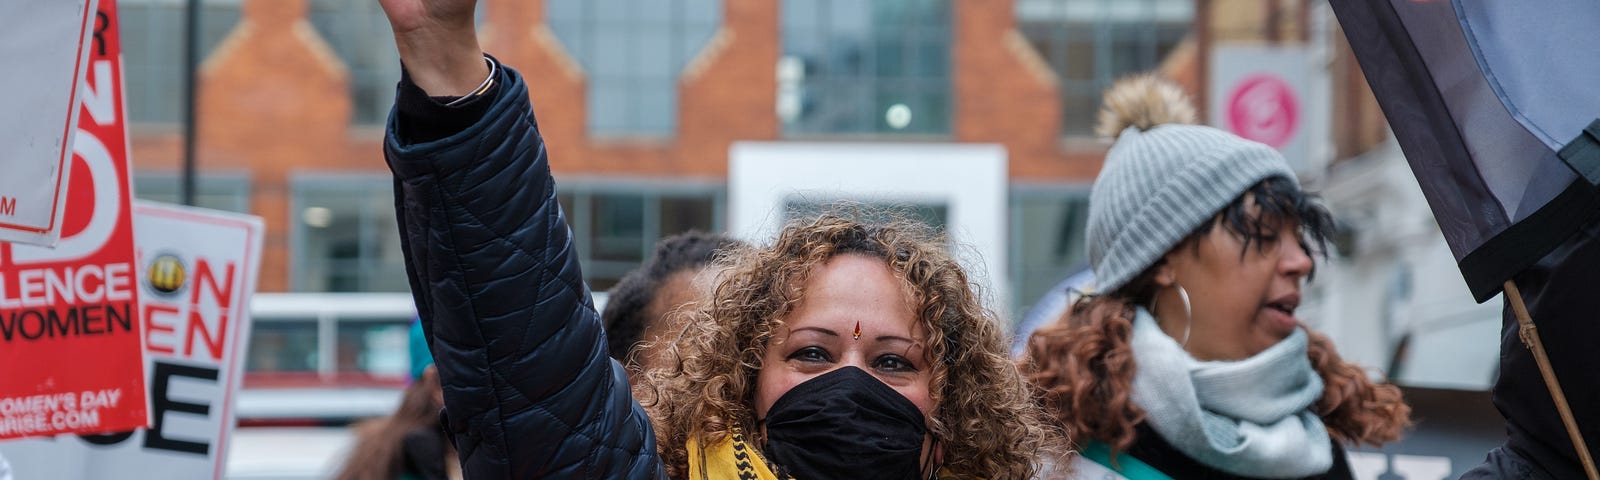 Woman protestor with fist raised